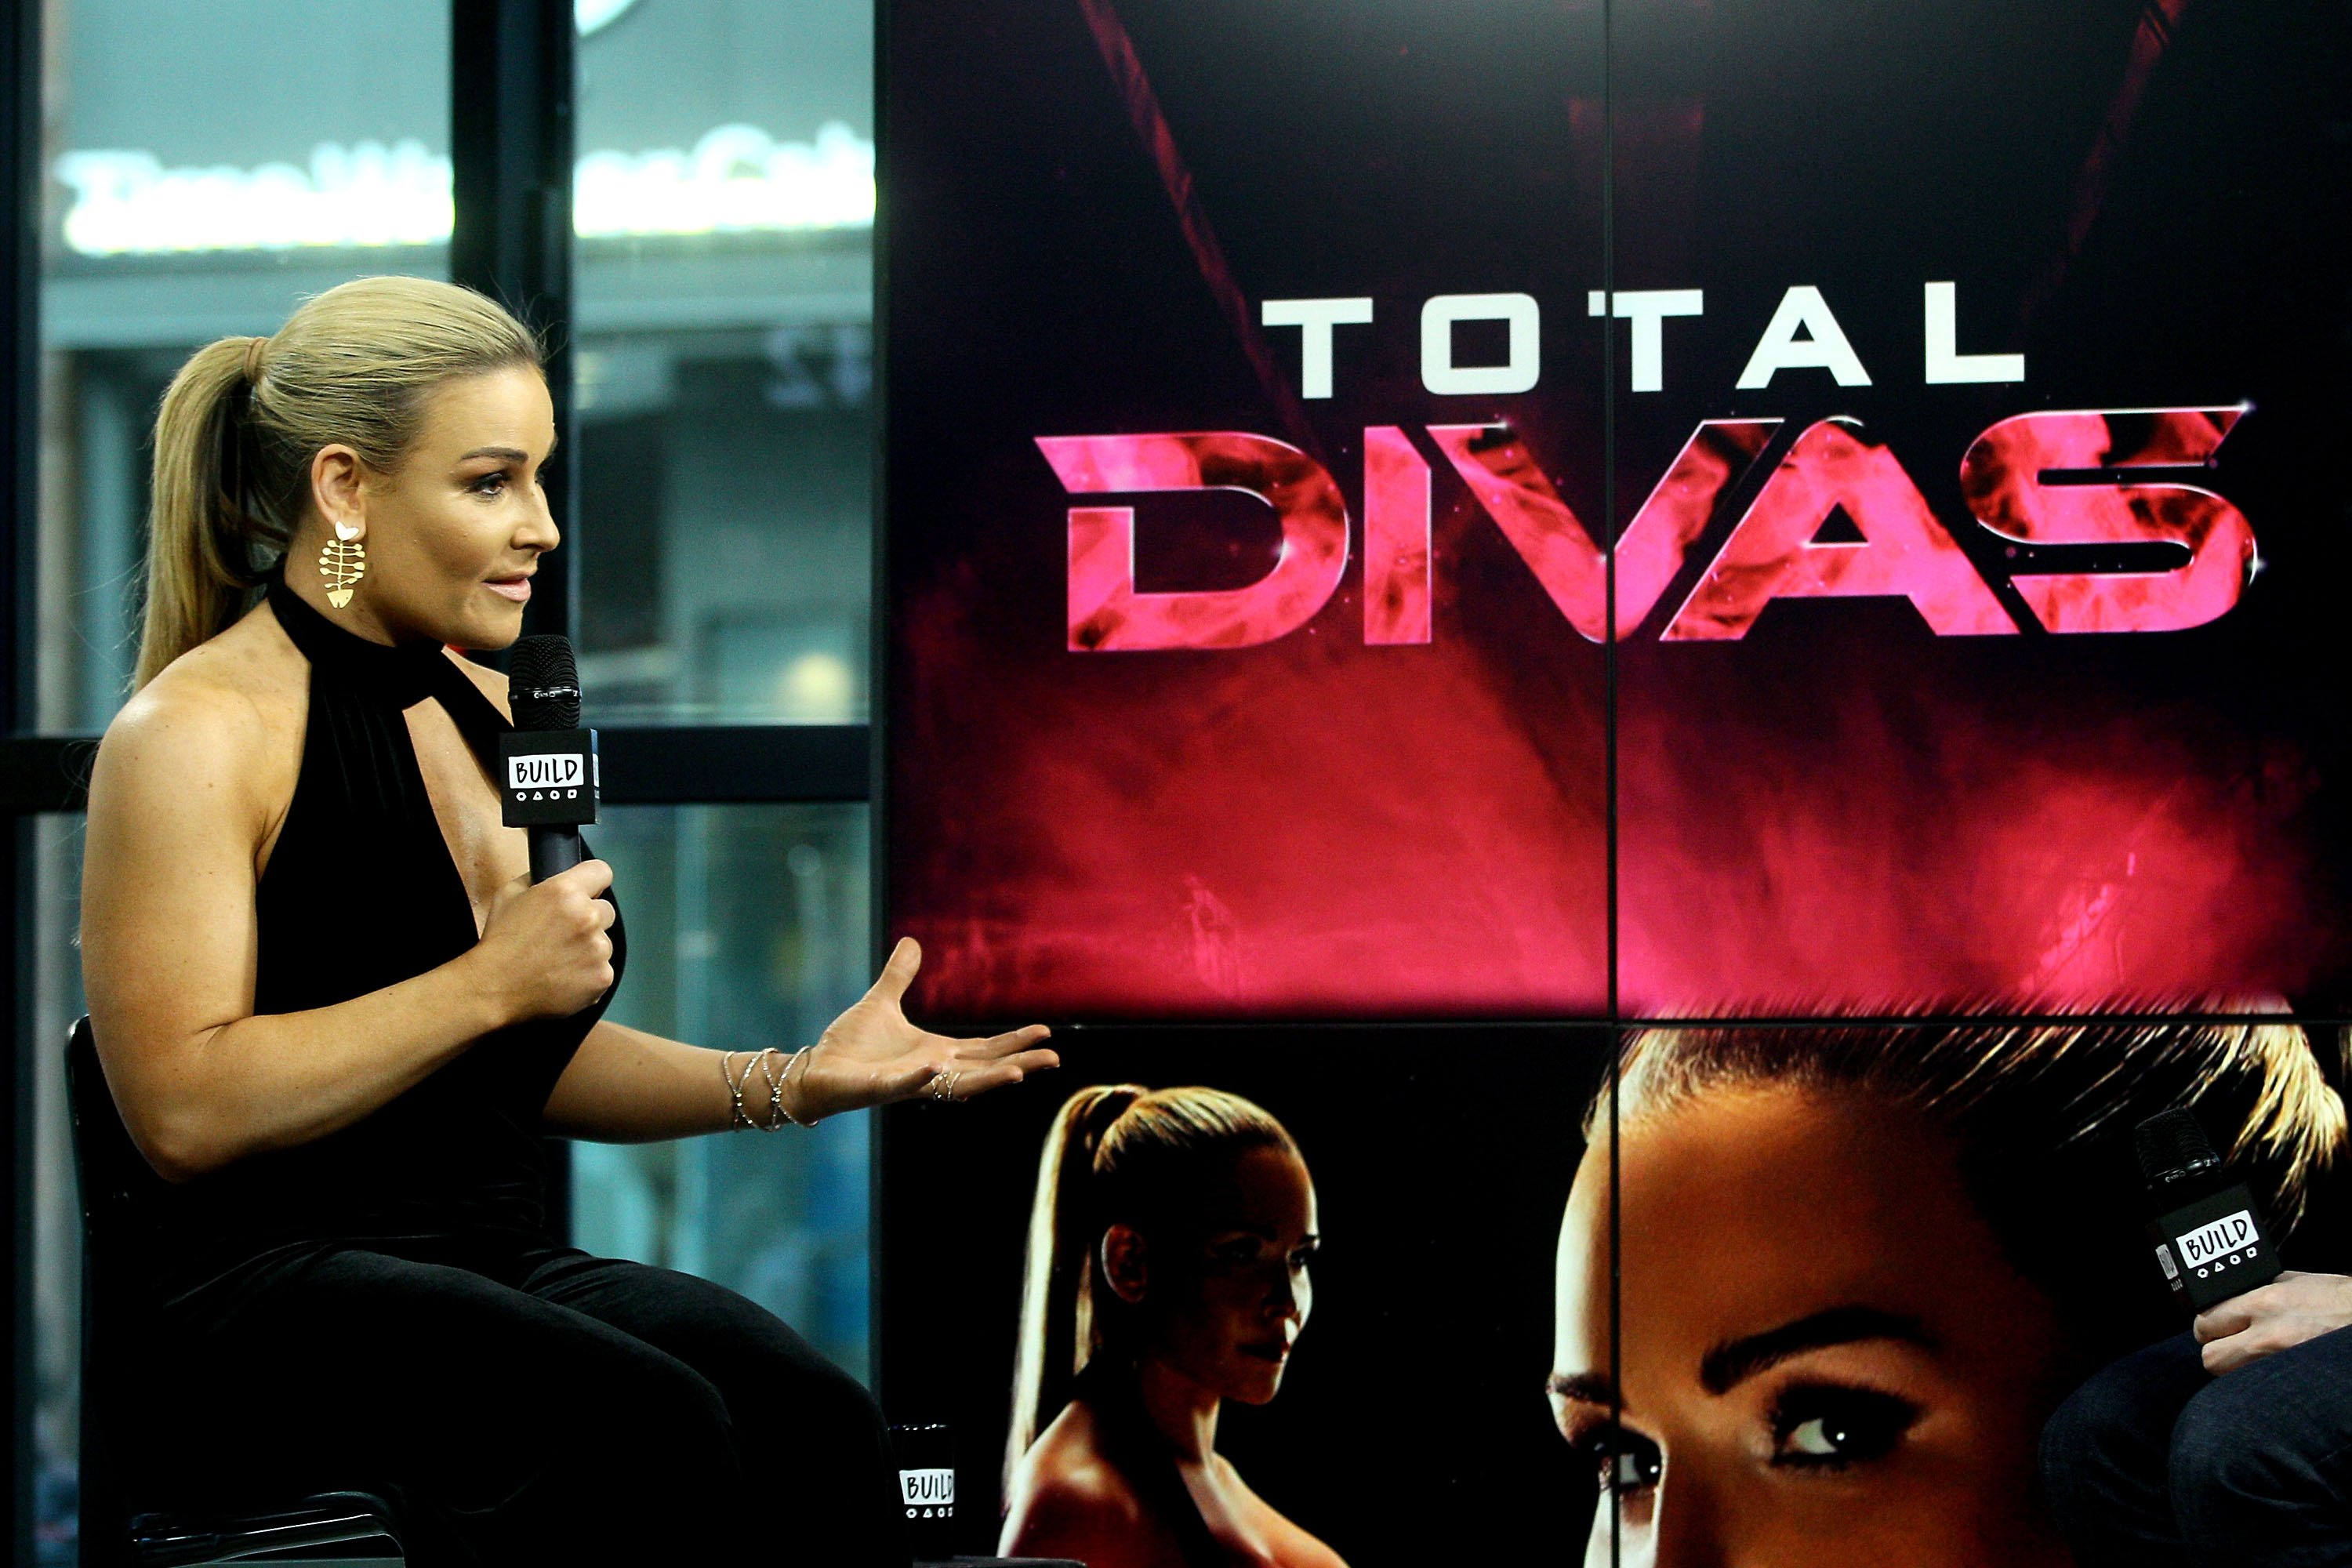 Cody Rhodes Makes Interesting Observation, Total Divas Preview Clips Released